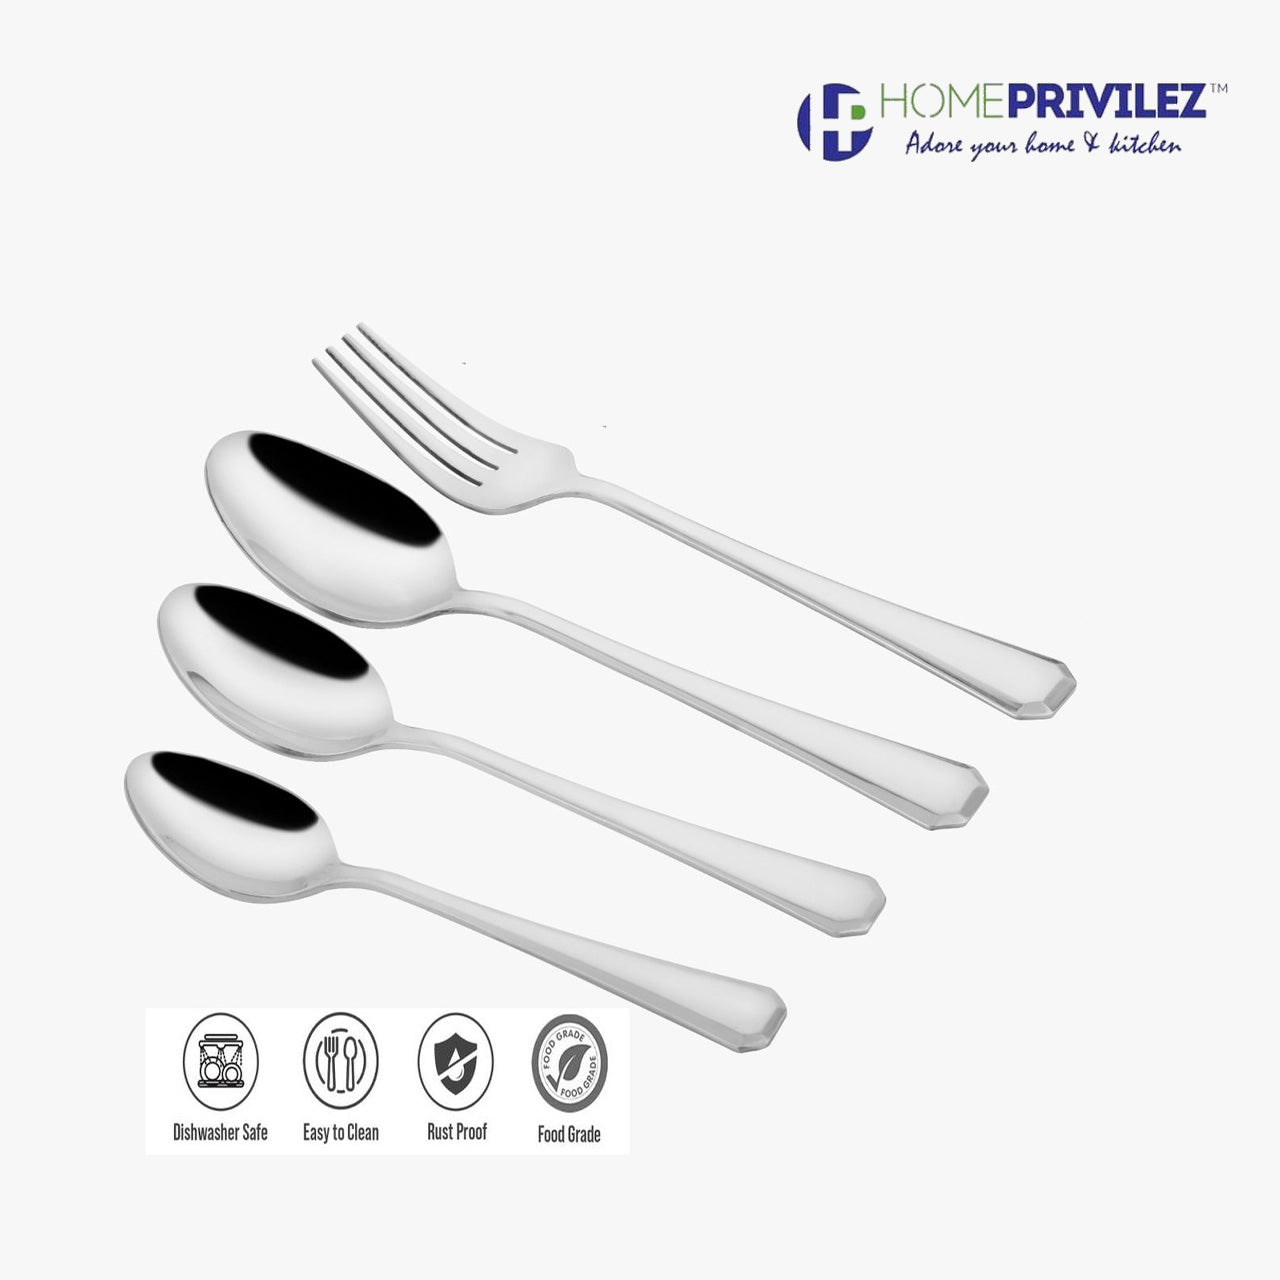 Daisy Cutlery - Stainless Steel 24pcs Cutlery in Stainless Steel stand with wooden base